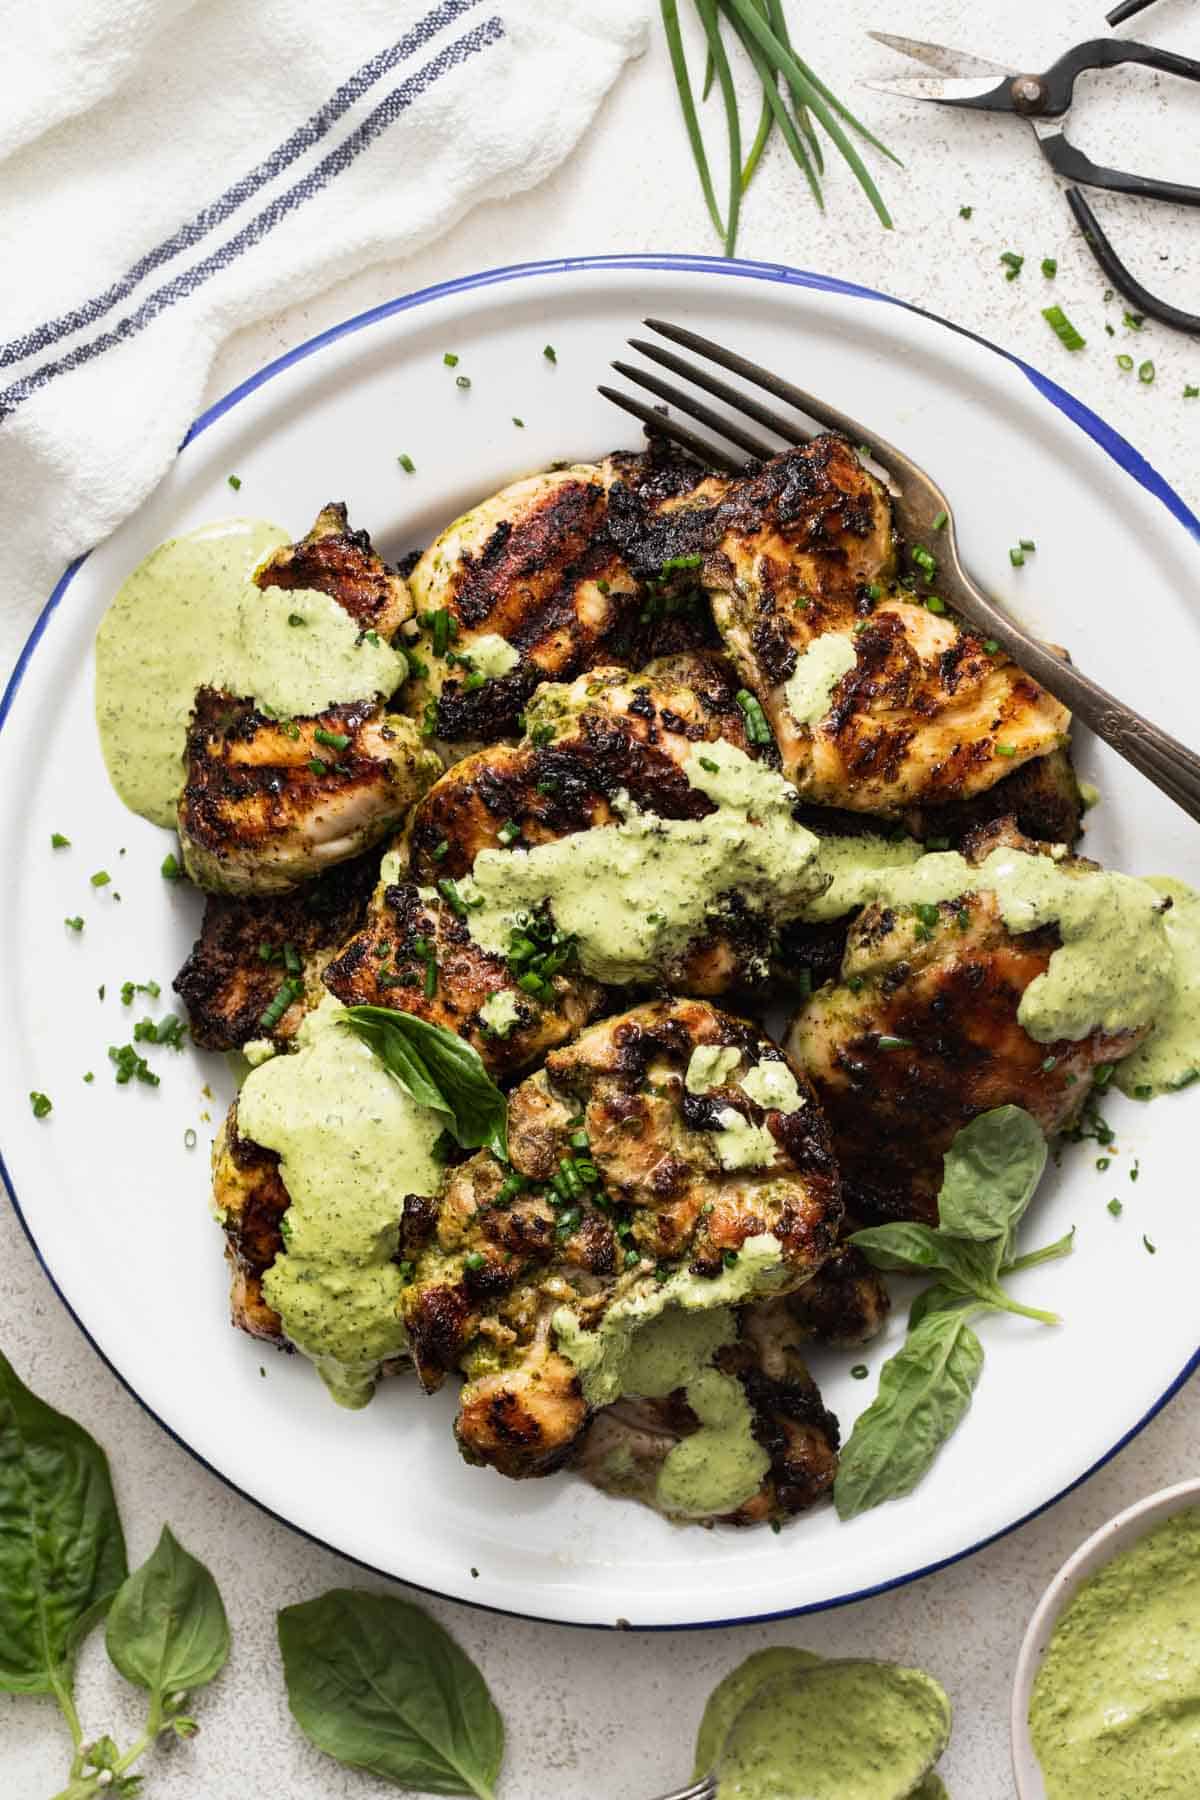 Chicken thighs grilled and drizzled with a green herb sauce on top.